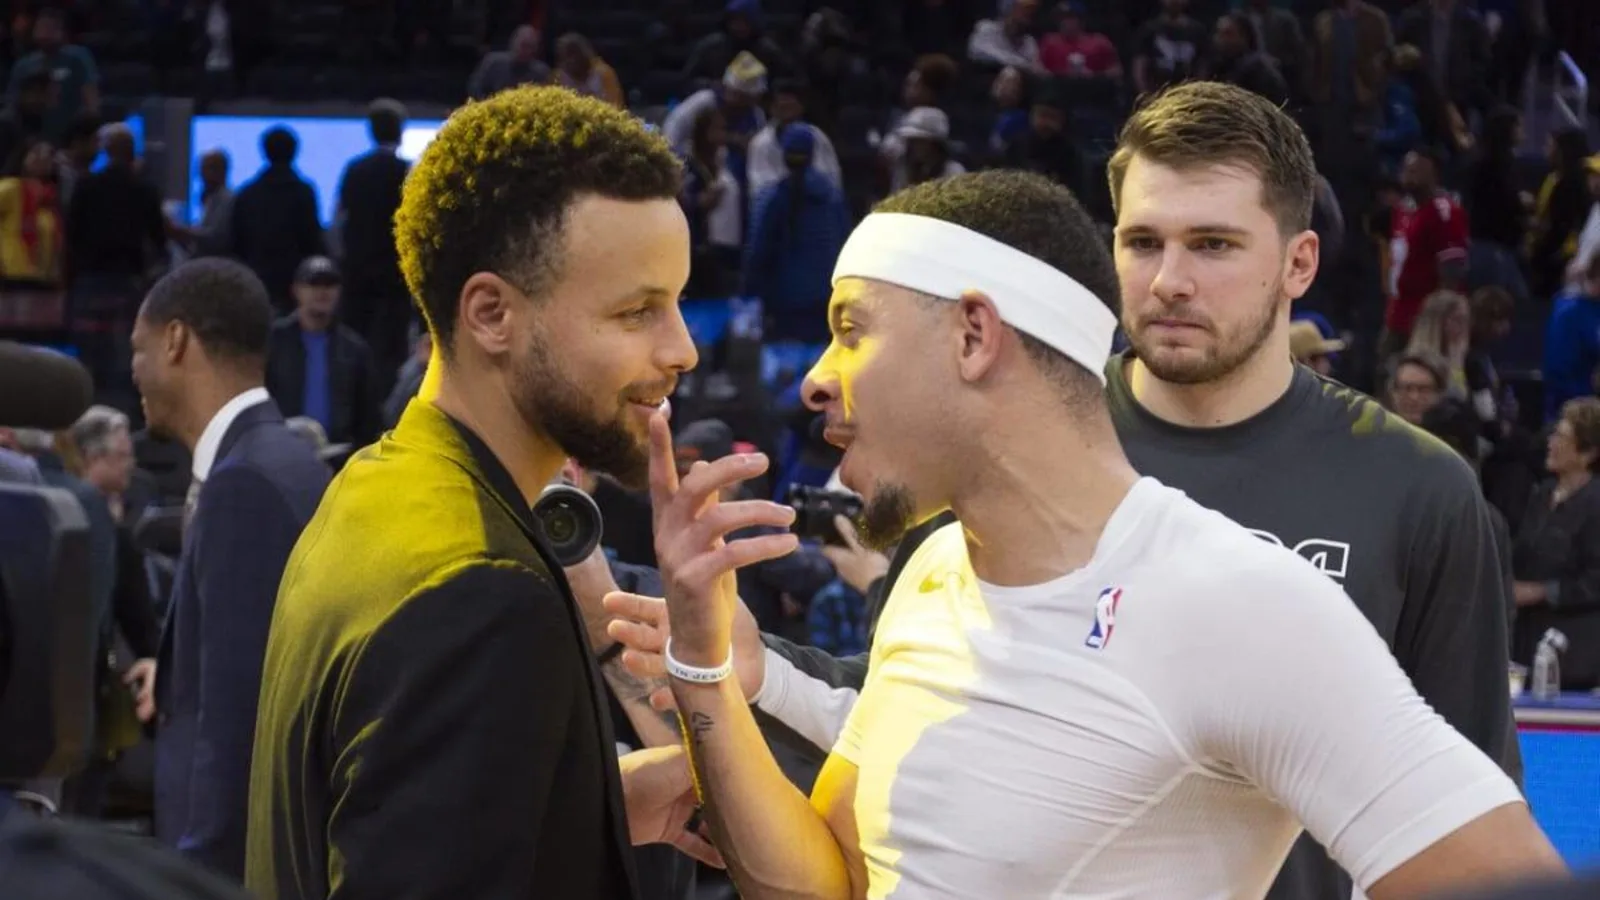 Seth Curry reacts to possibility of teaming up with Steph